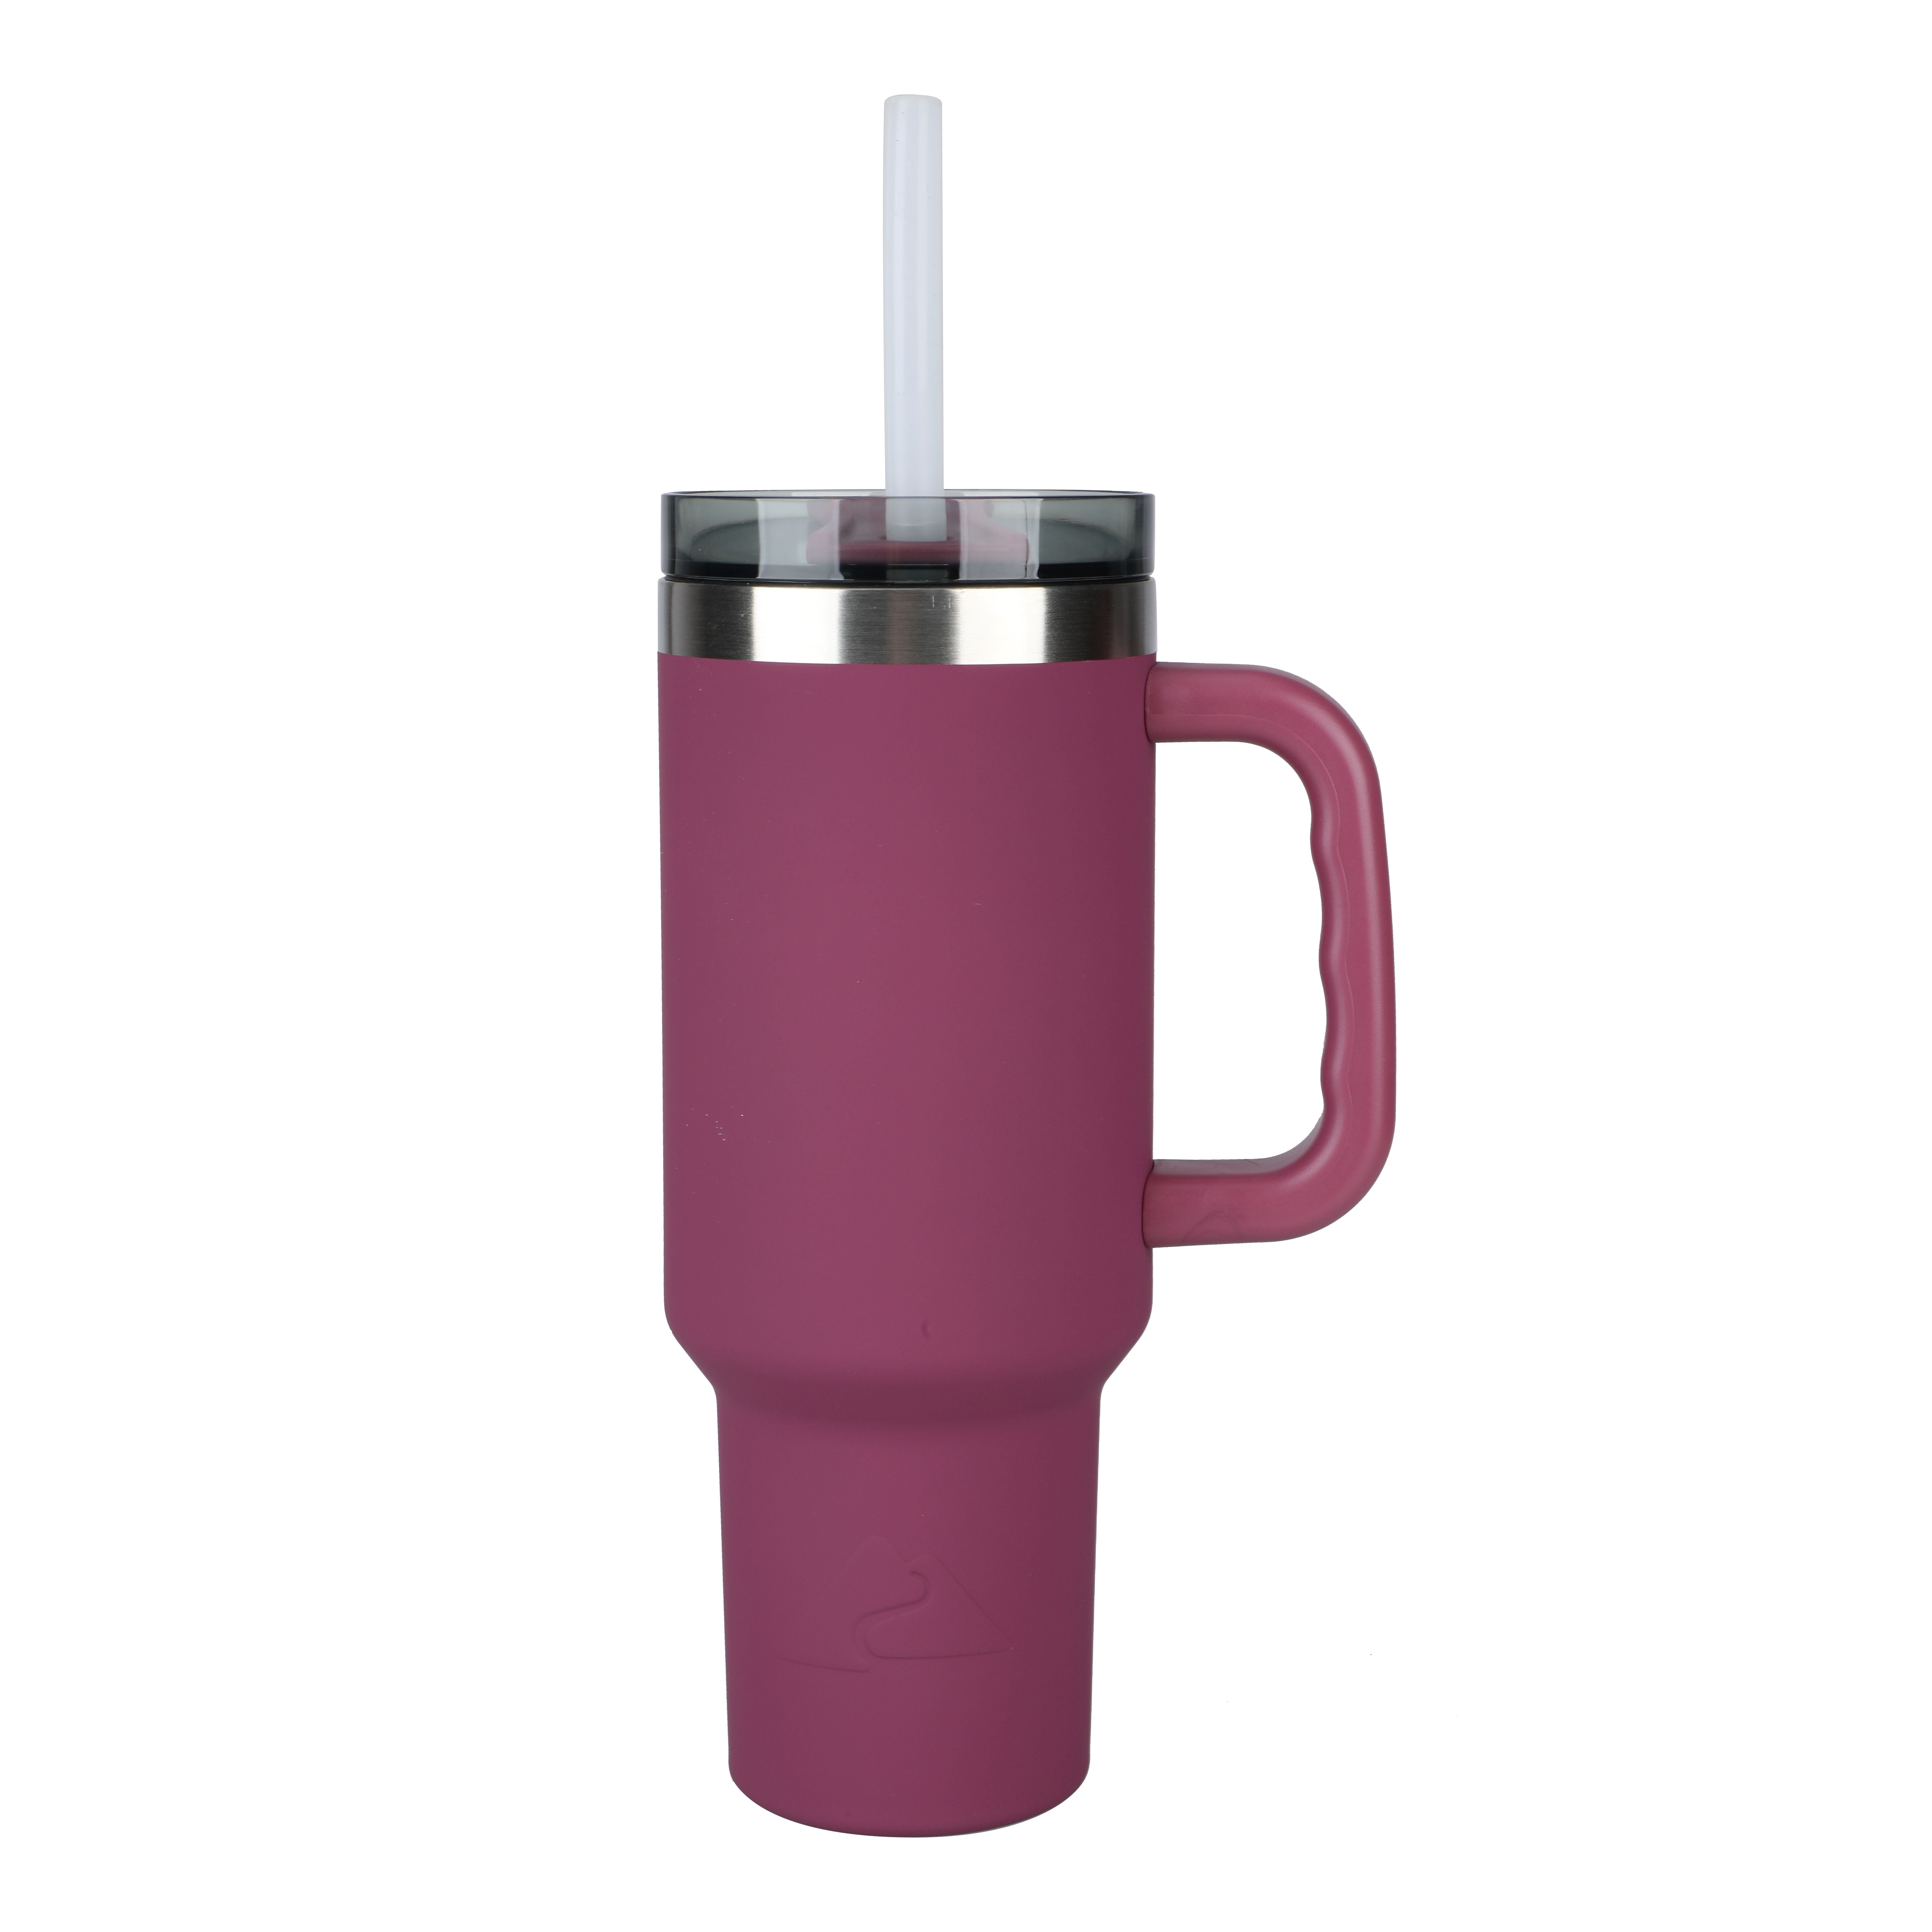 OZARK TRAIL Insulated Double Wall Stainless Steel 20 Ounce Pink Tumbler Cup  Cold/Hot Drinks Locking …See more OZARK TRAIL Insulated Double Wall